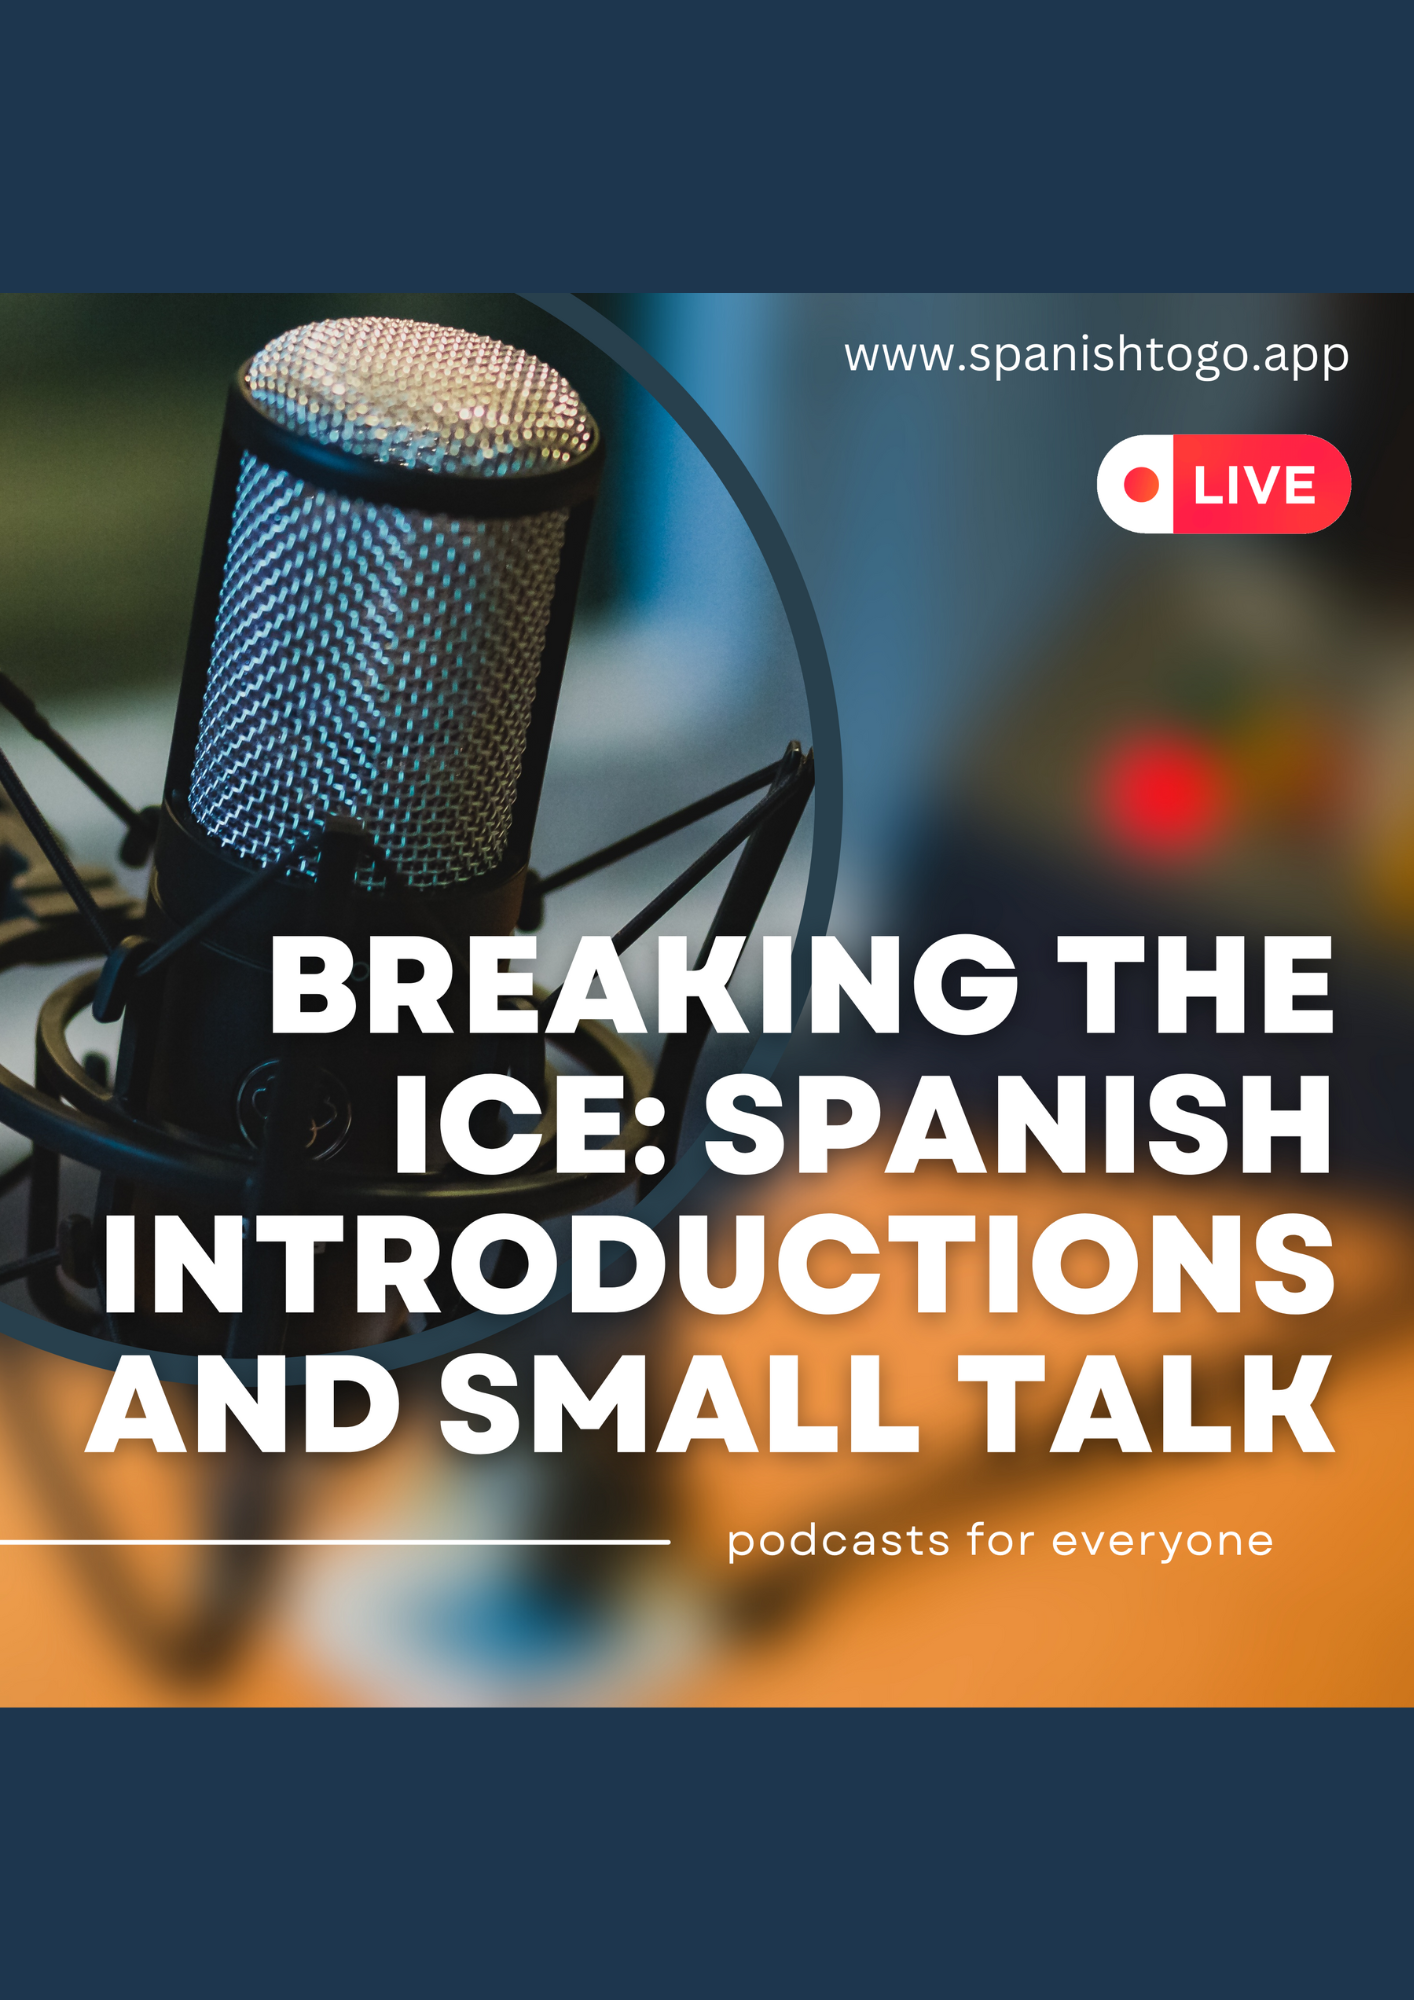 Breaking the Ice: Spanish Introductions and Small Talk